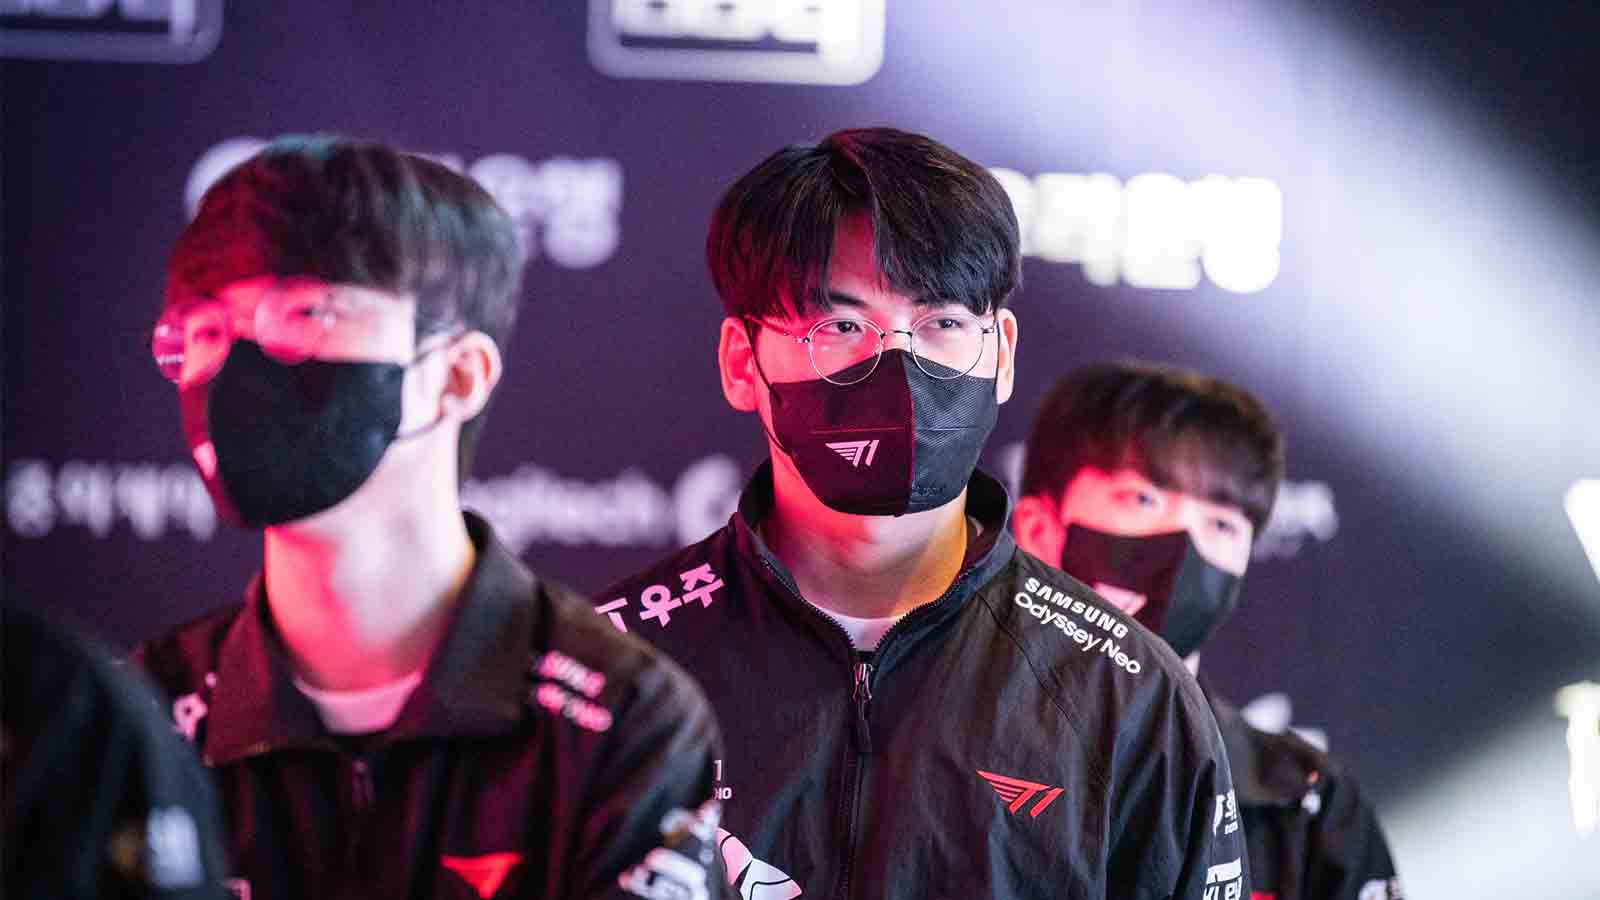 T1 Gumayusi, Bengi are convinced this 7th place LCK team are a threat